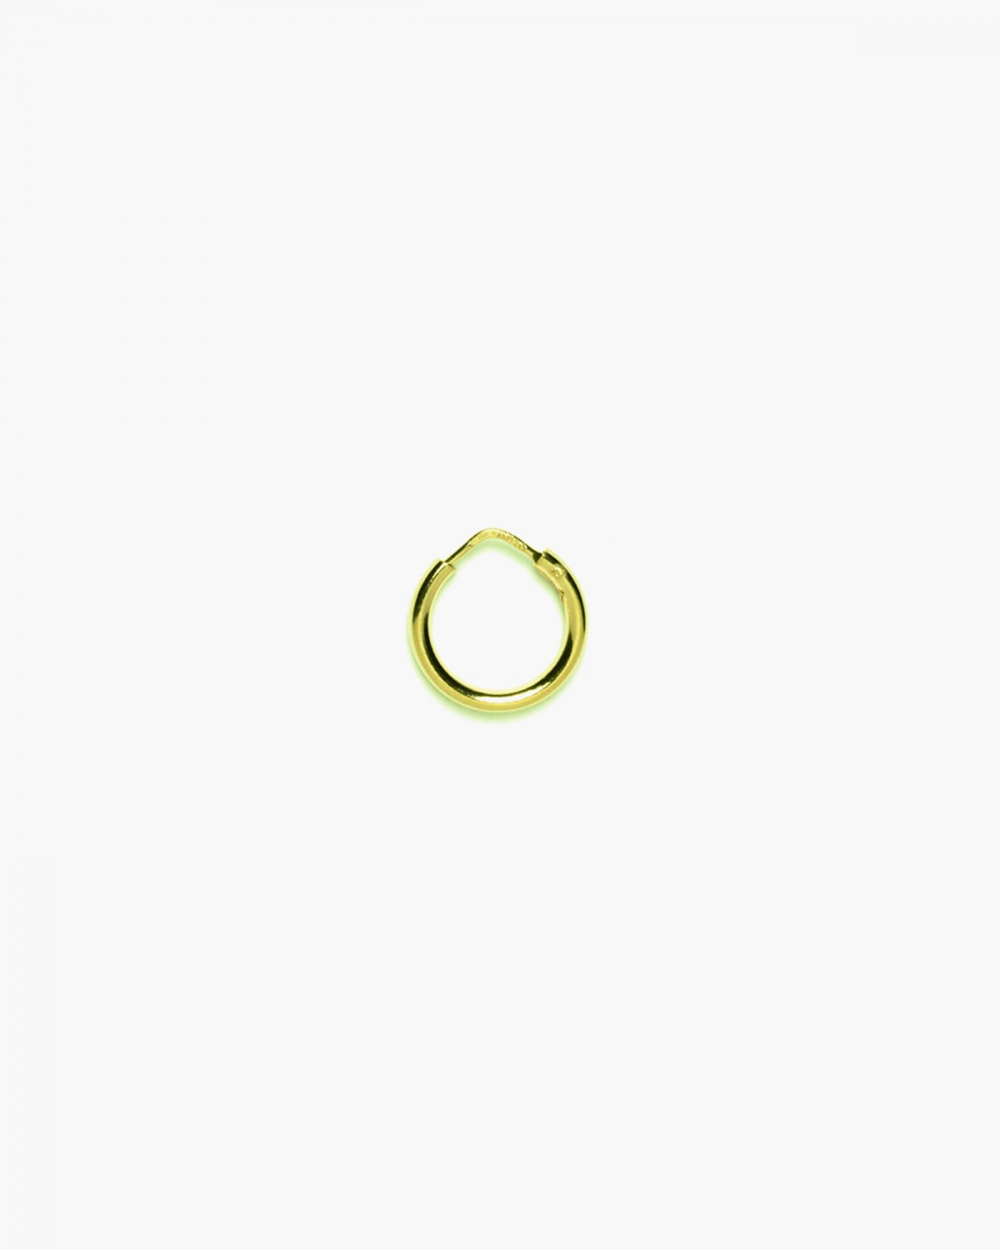 ROUND TUBE 2.5 CLOSING PIN SINGLE HOOP EARRING / POLISHED YELLOW GOLD